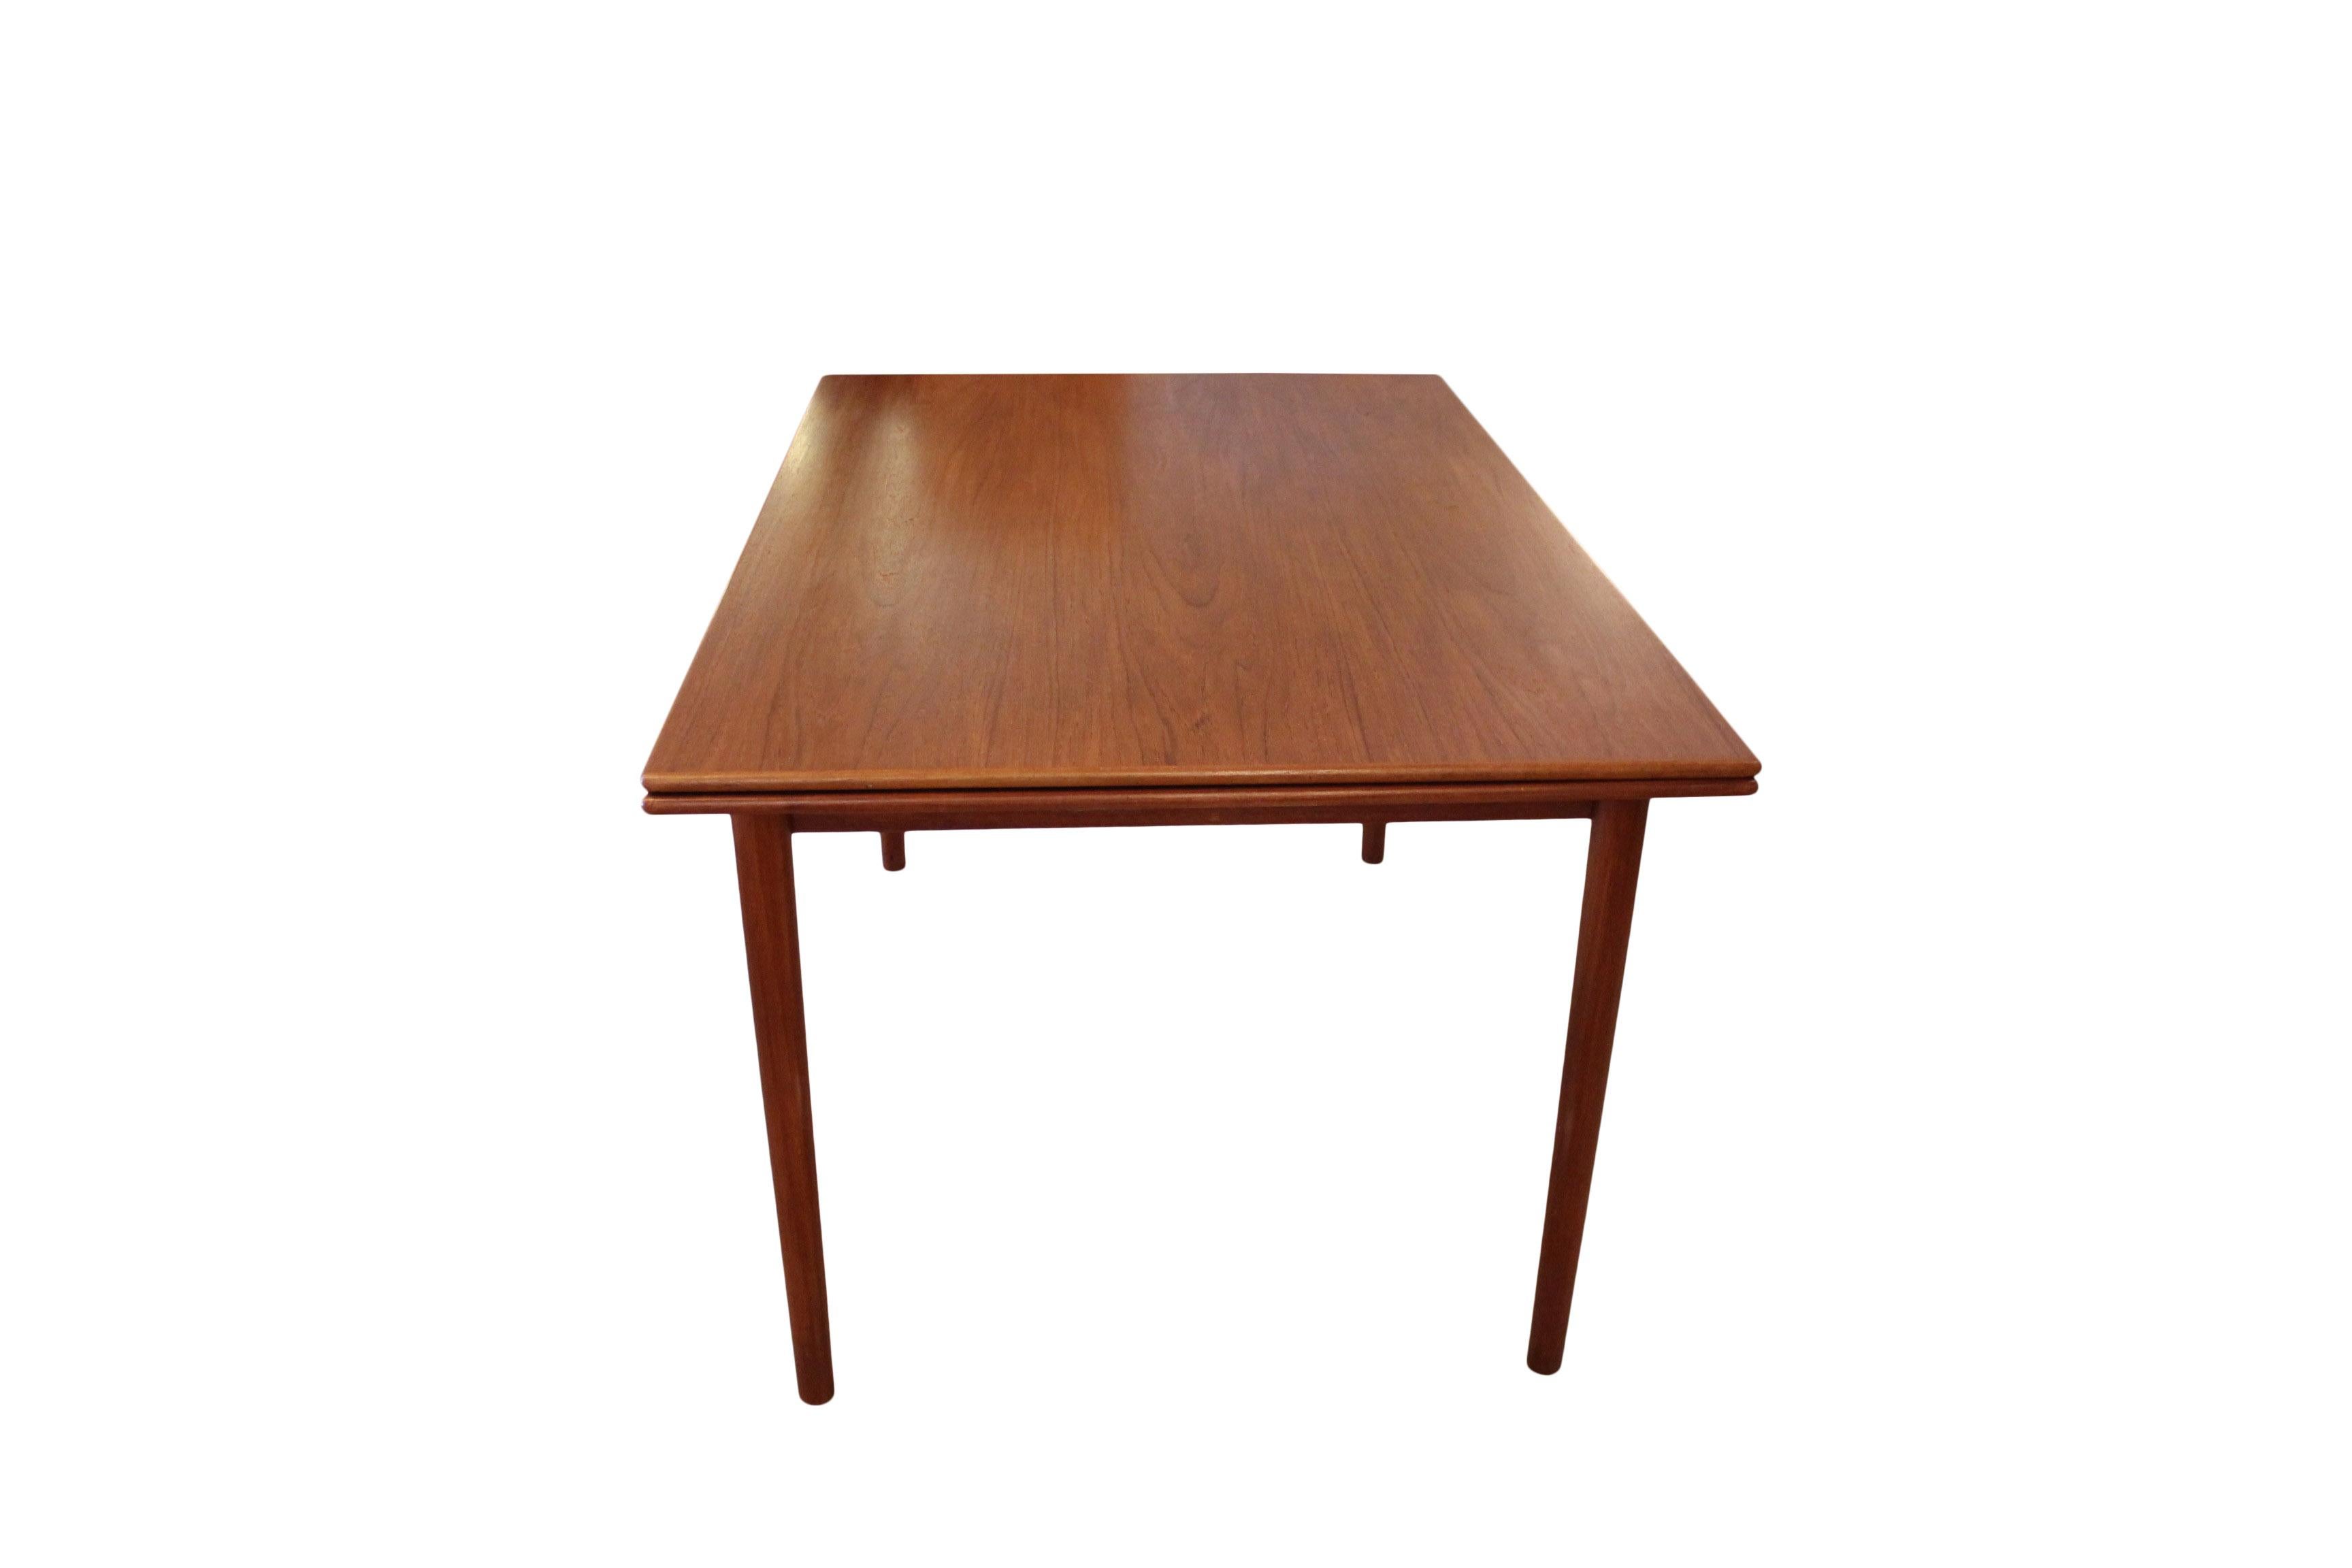 This exquisite dining table, an epitome of Danish design from the 1960s, is crafted from teak, renowned for its rich grain and durability. Its sleek and elegant design is characterized by clean lines and minimalist aesthetics, typical of the